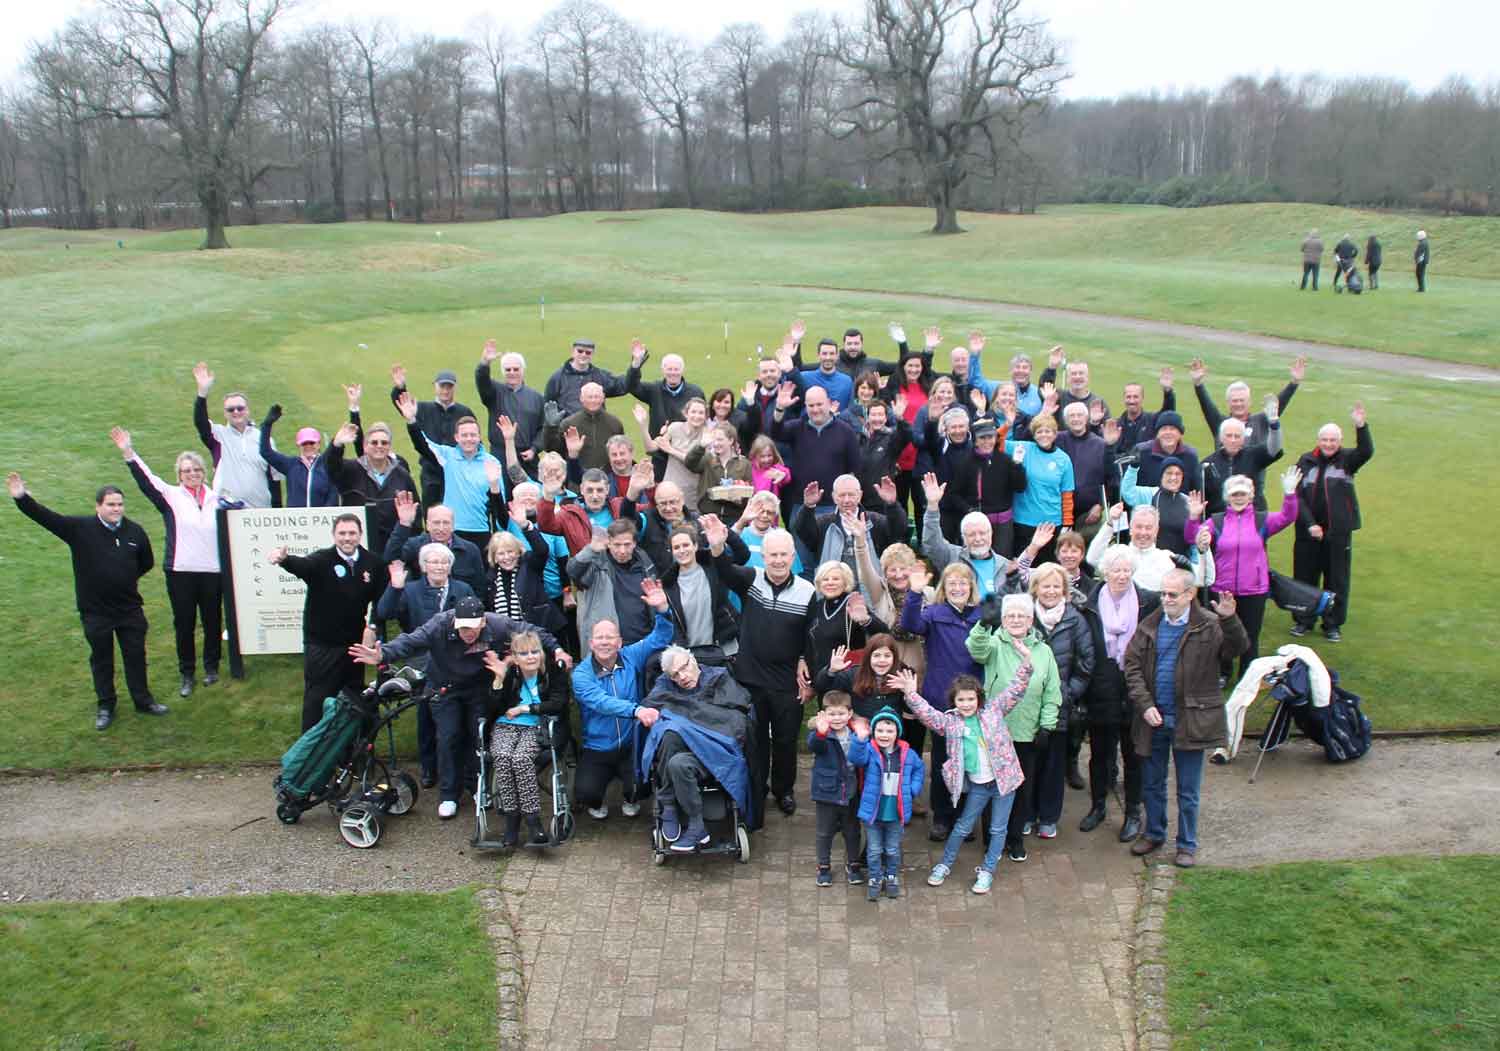 Over 100 people joined this fun event at Rudding Park Golf Academy to help fundraise